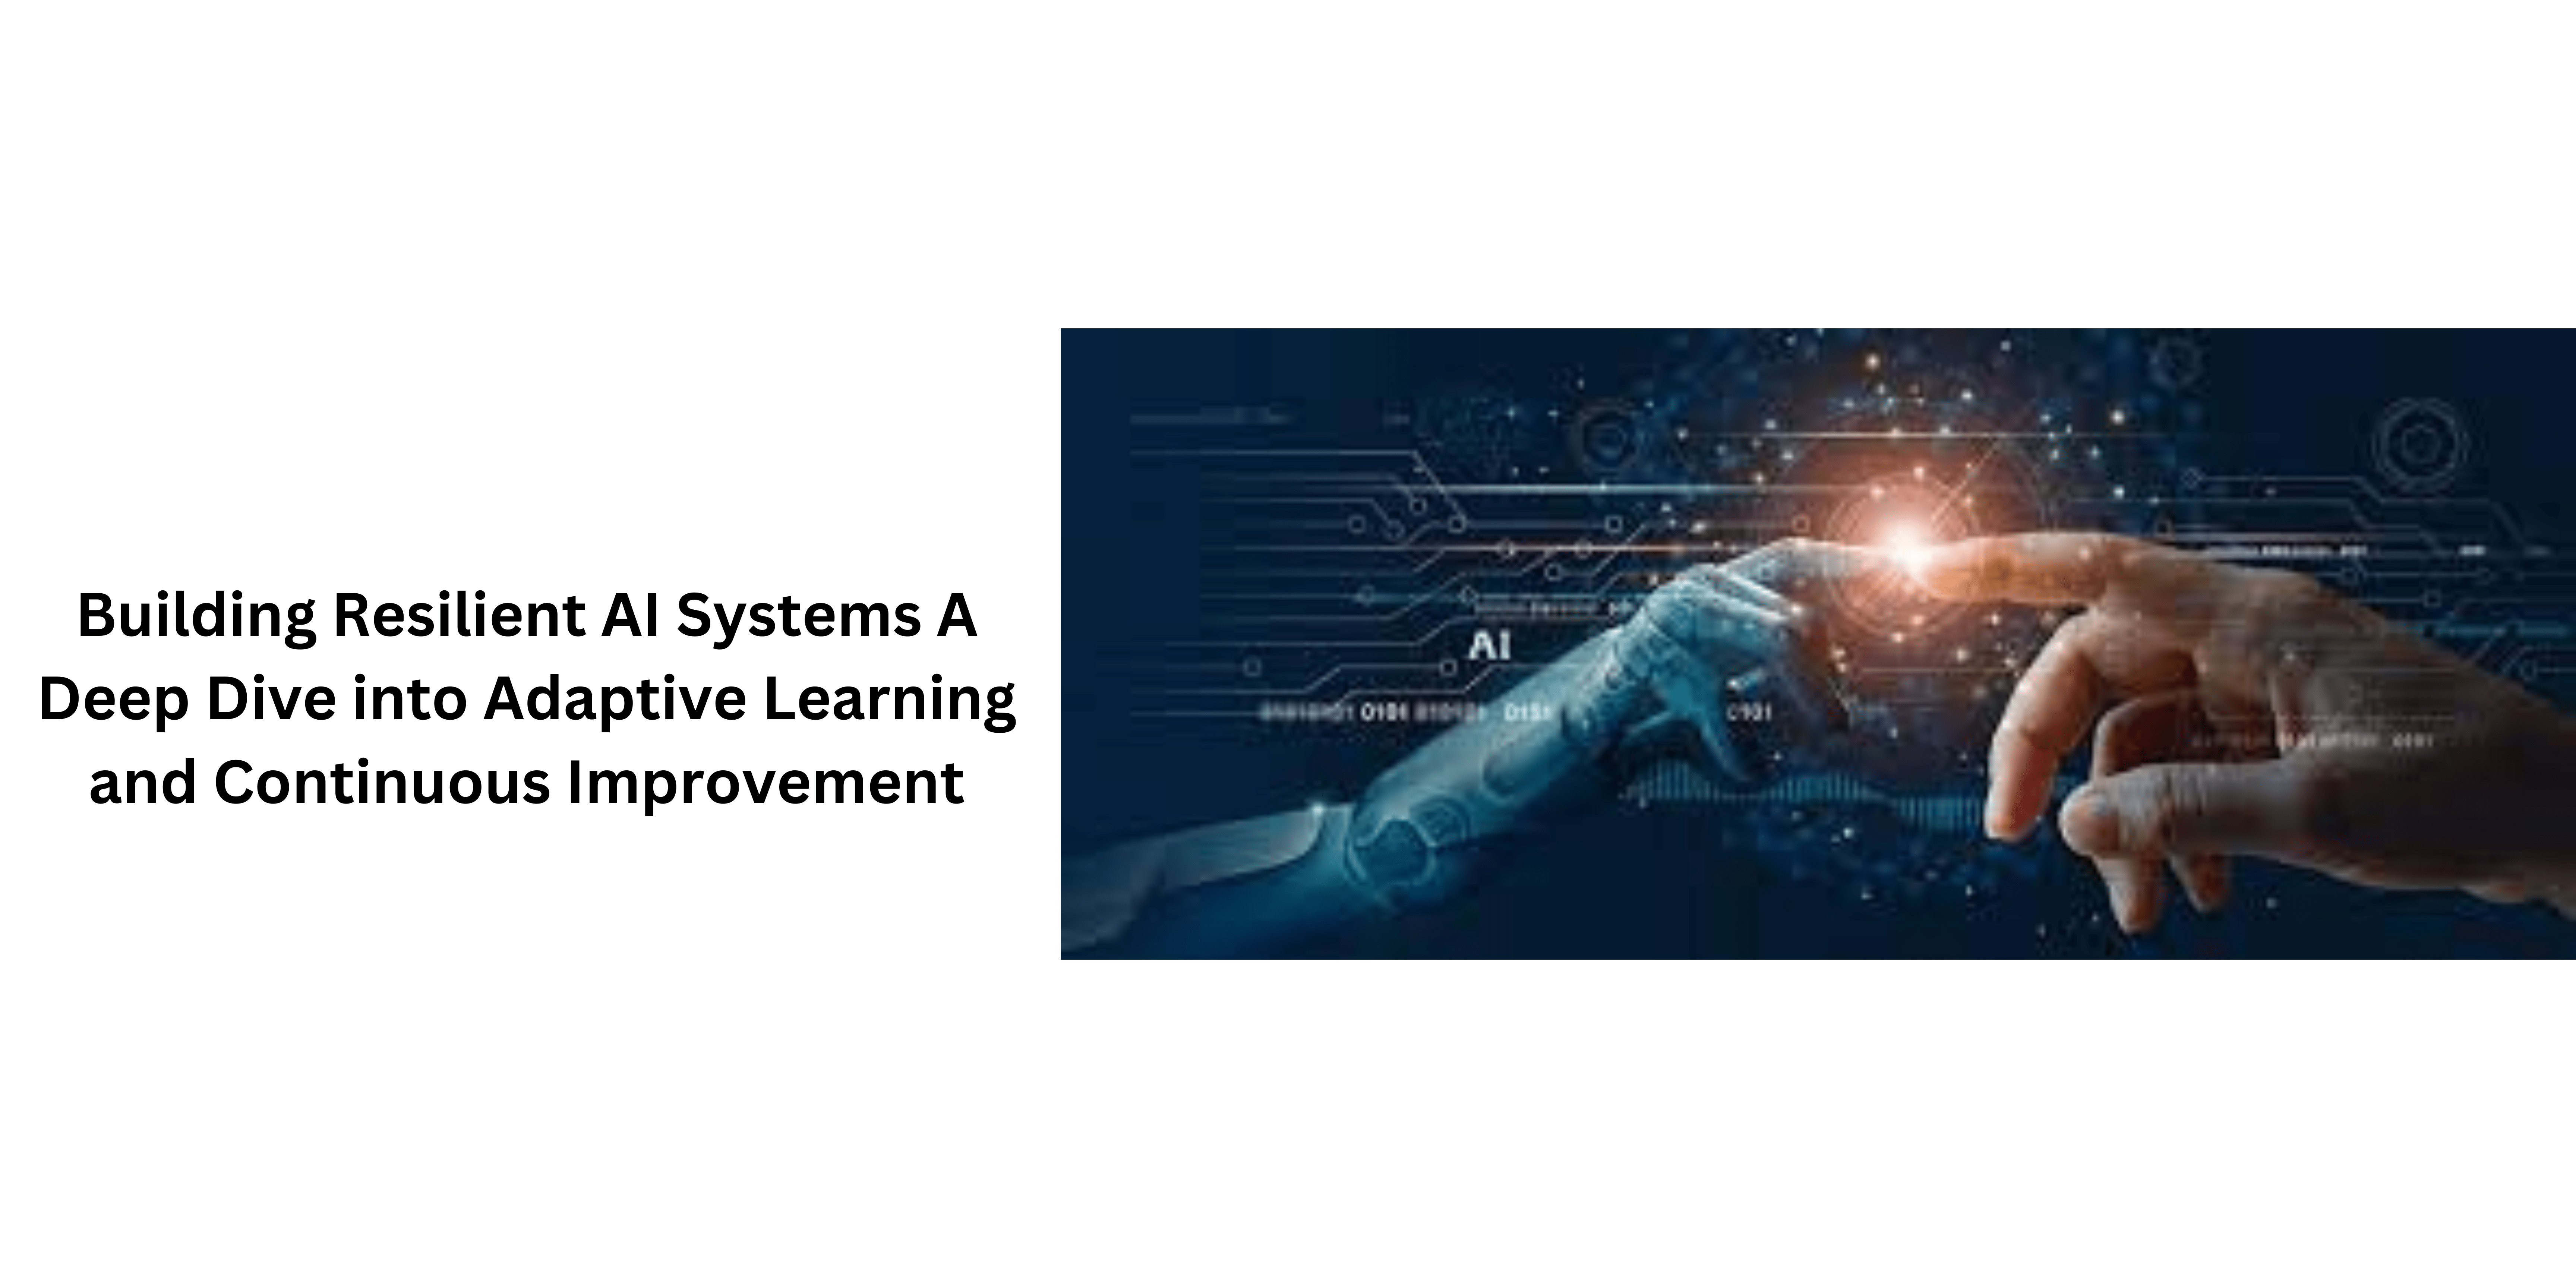 Building Resilient AI Systems A Deep Dive into Adaptive Learning and Continuous Improvement